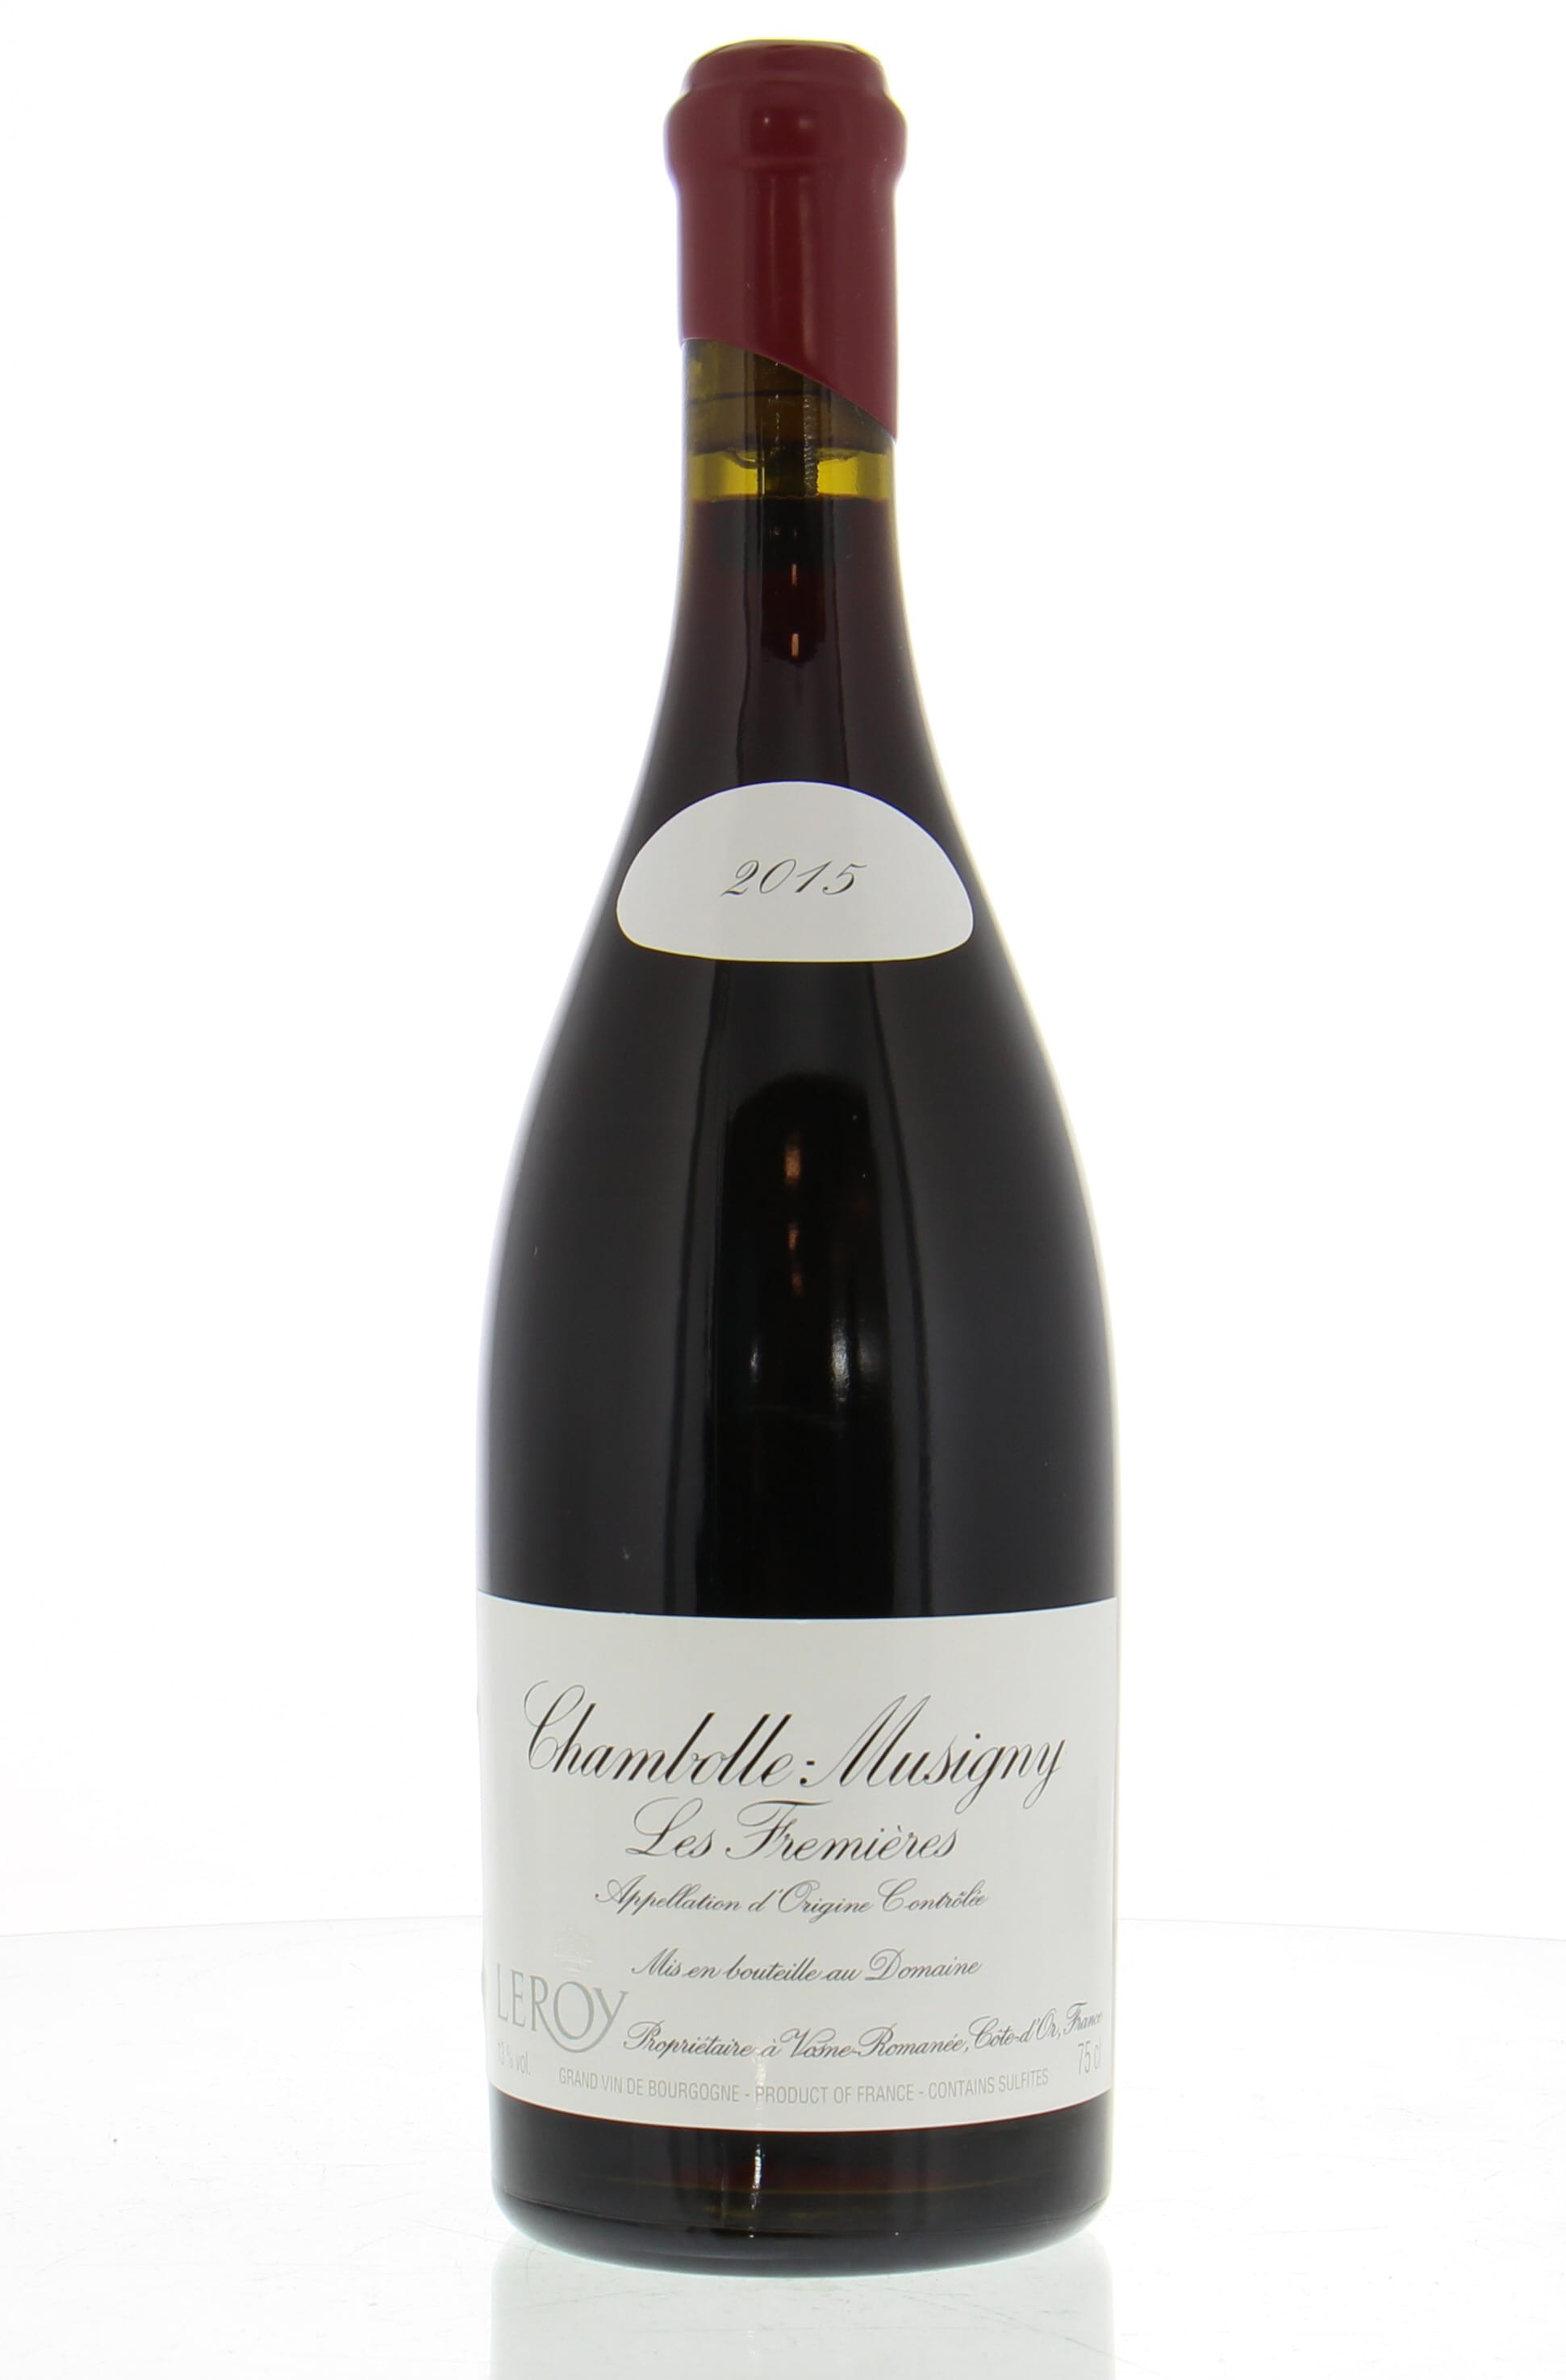 Domaine Leroy - Chambolle Musigny les Fremieres 2015 Perfect